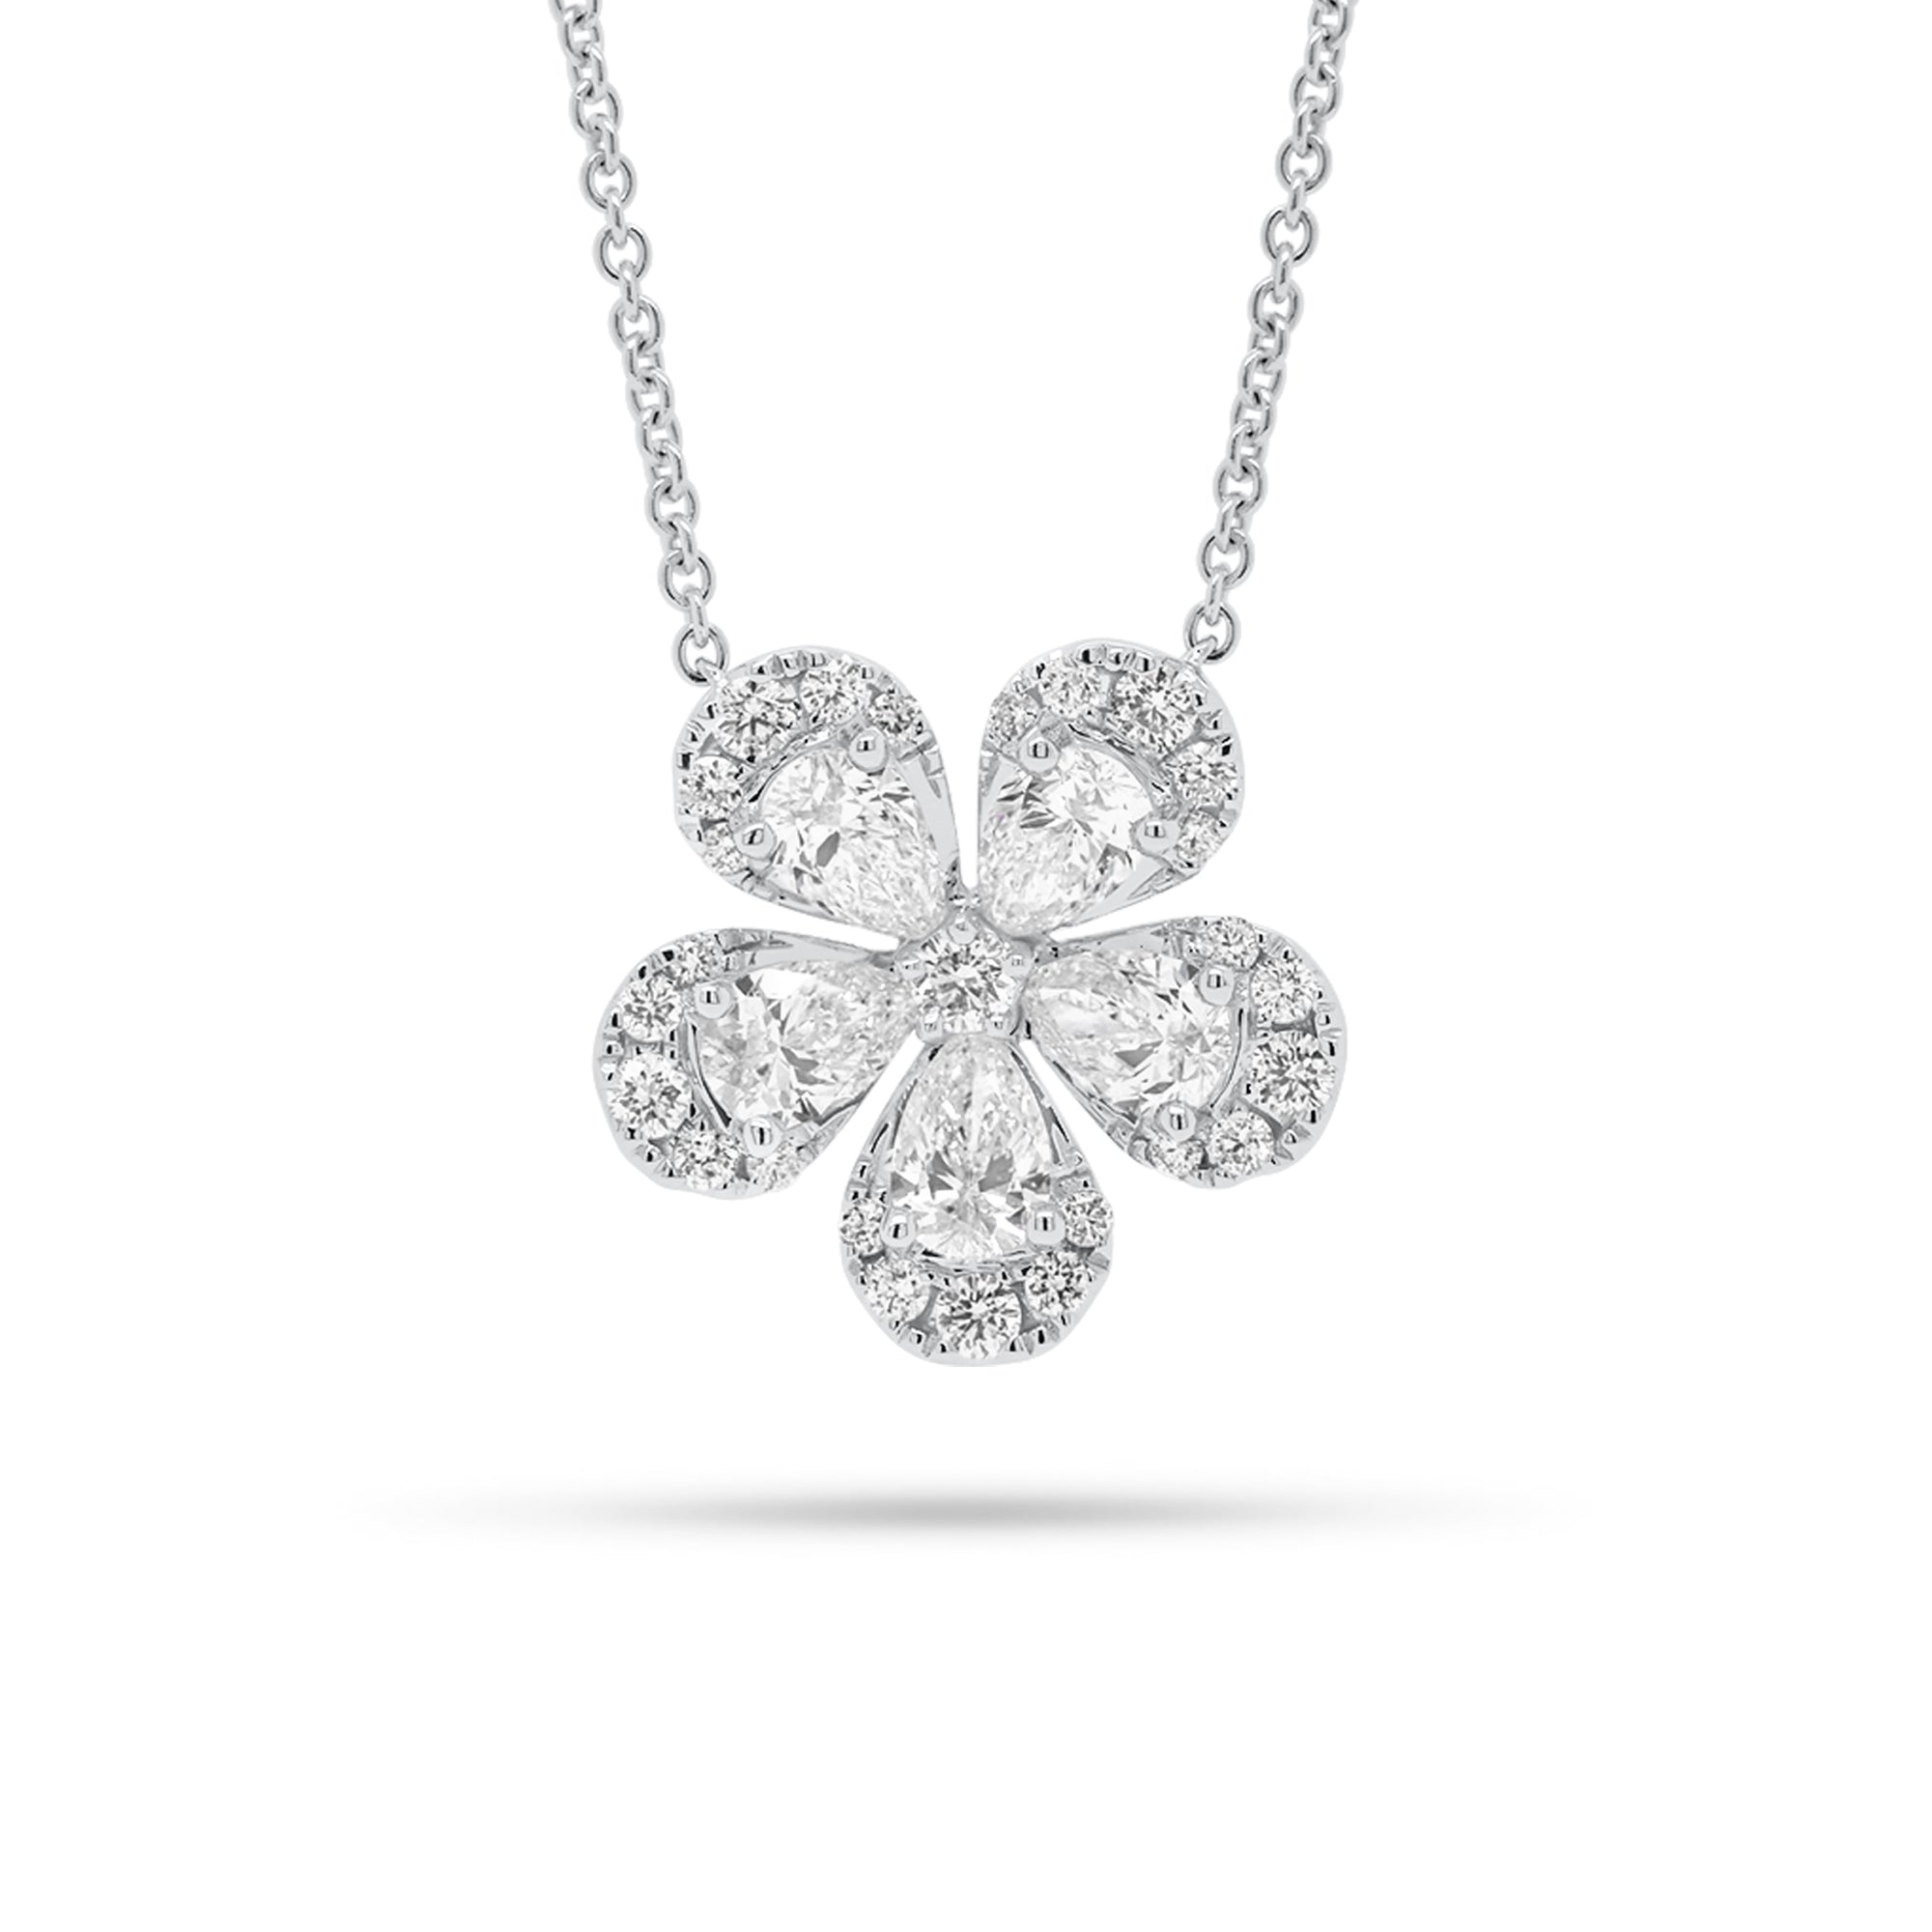 Round & Pear-Shaped Diamond Flower Pendant Necklace - 18K gold weighing 6.32 grams  - 5 pear-shaped diamonds weighing 1.49 carats  - 30 round diamonds weighing 0.54 carats